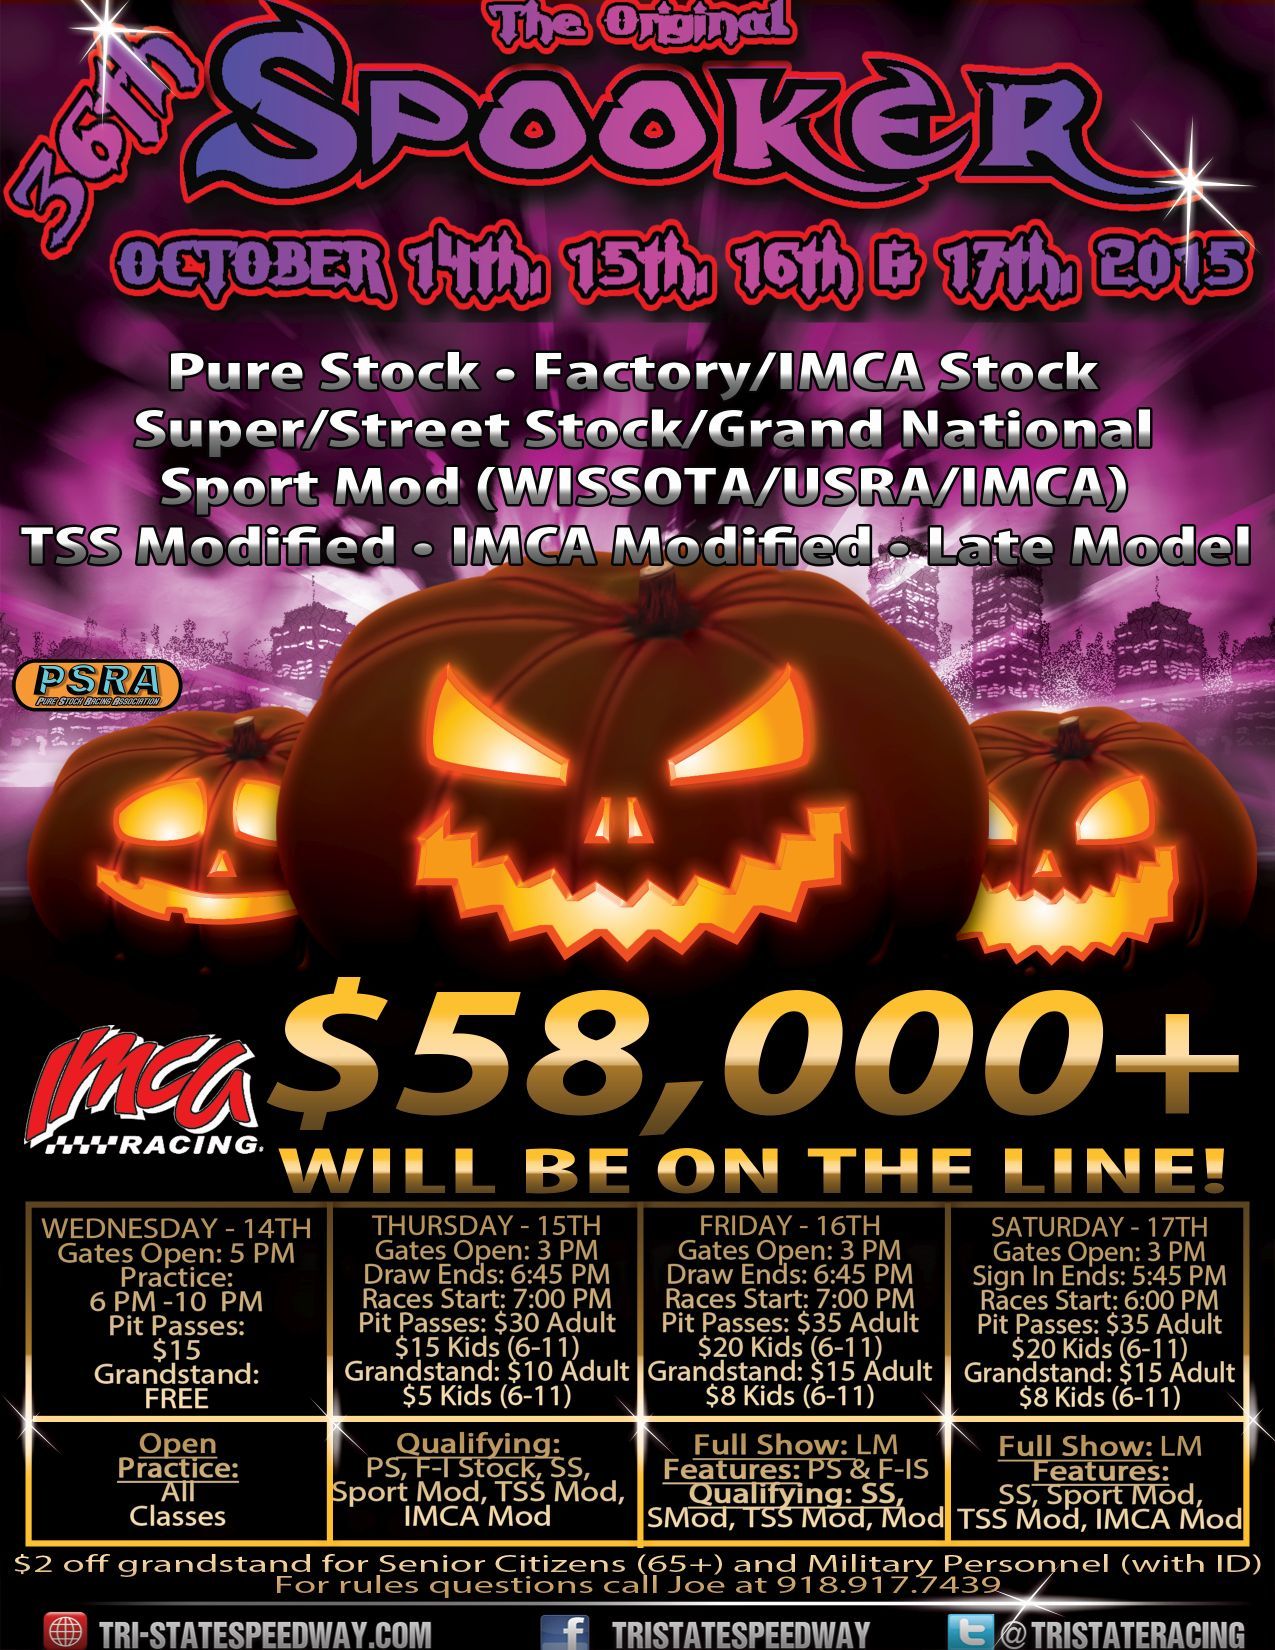 Information Released for the 36th Annual Spooker at Tri-State Speedway!